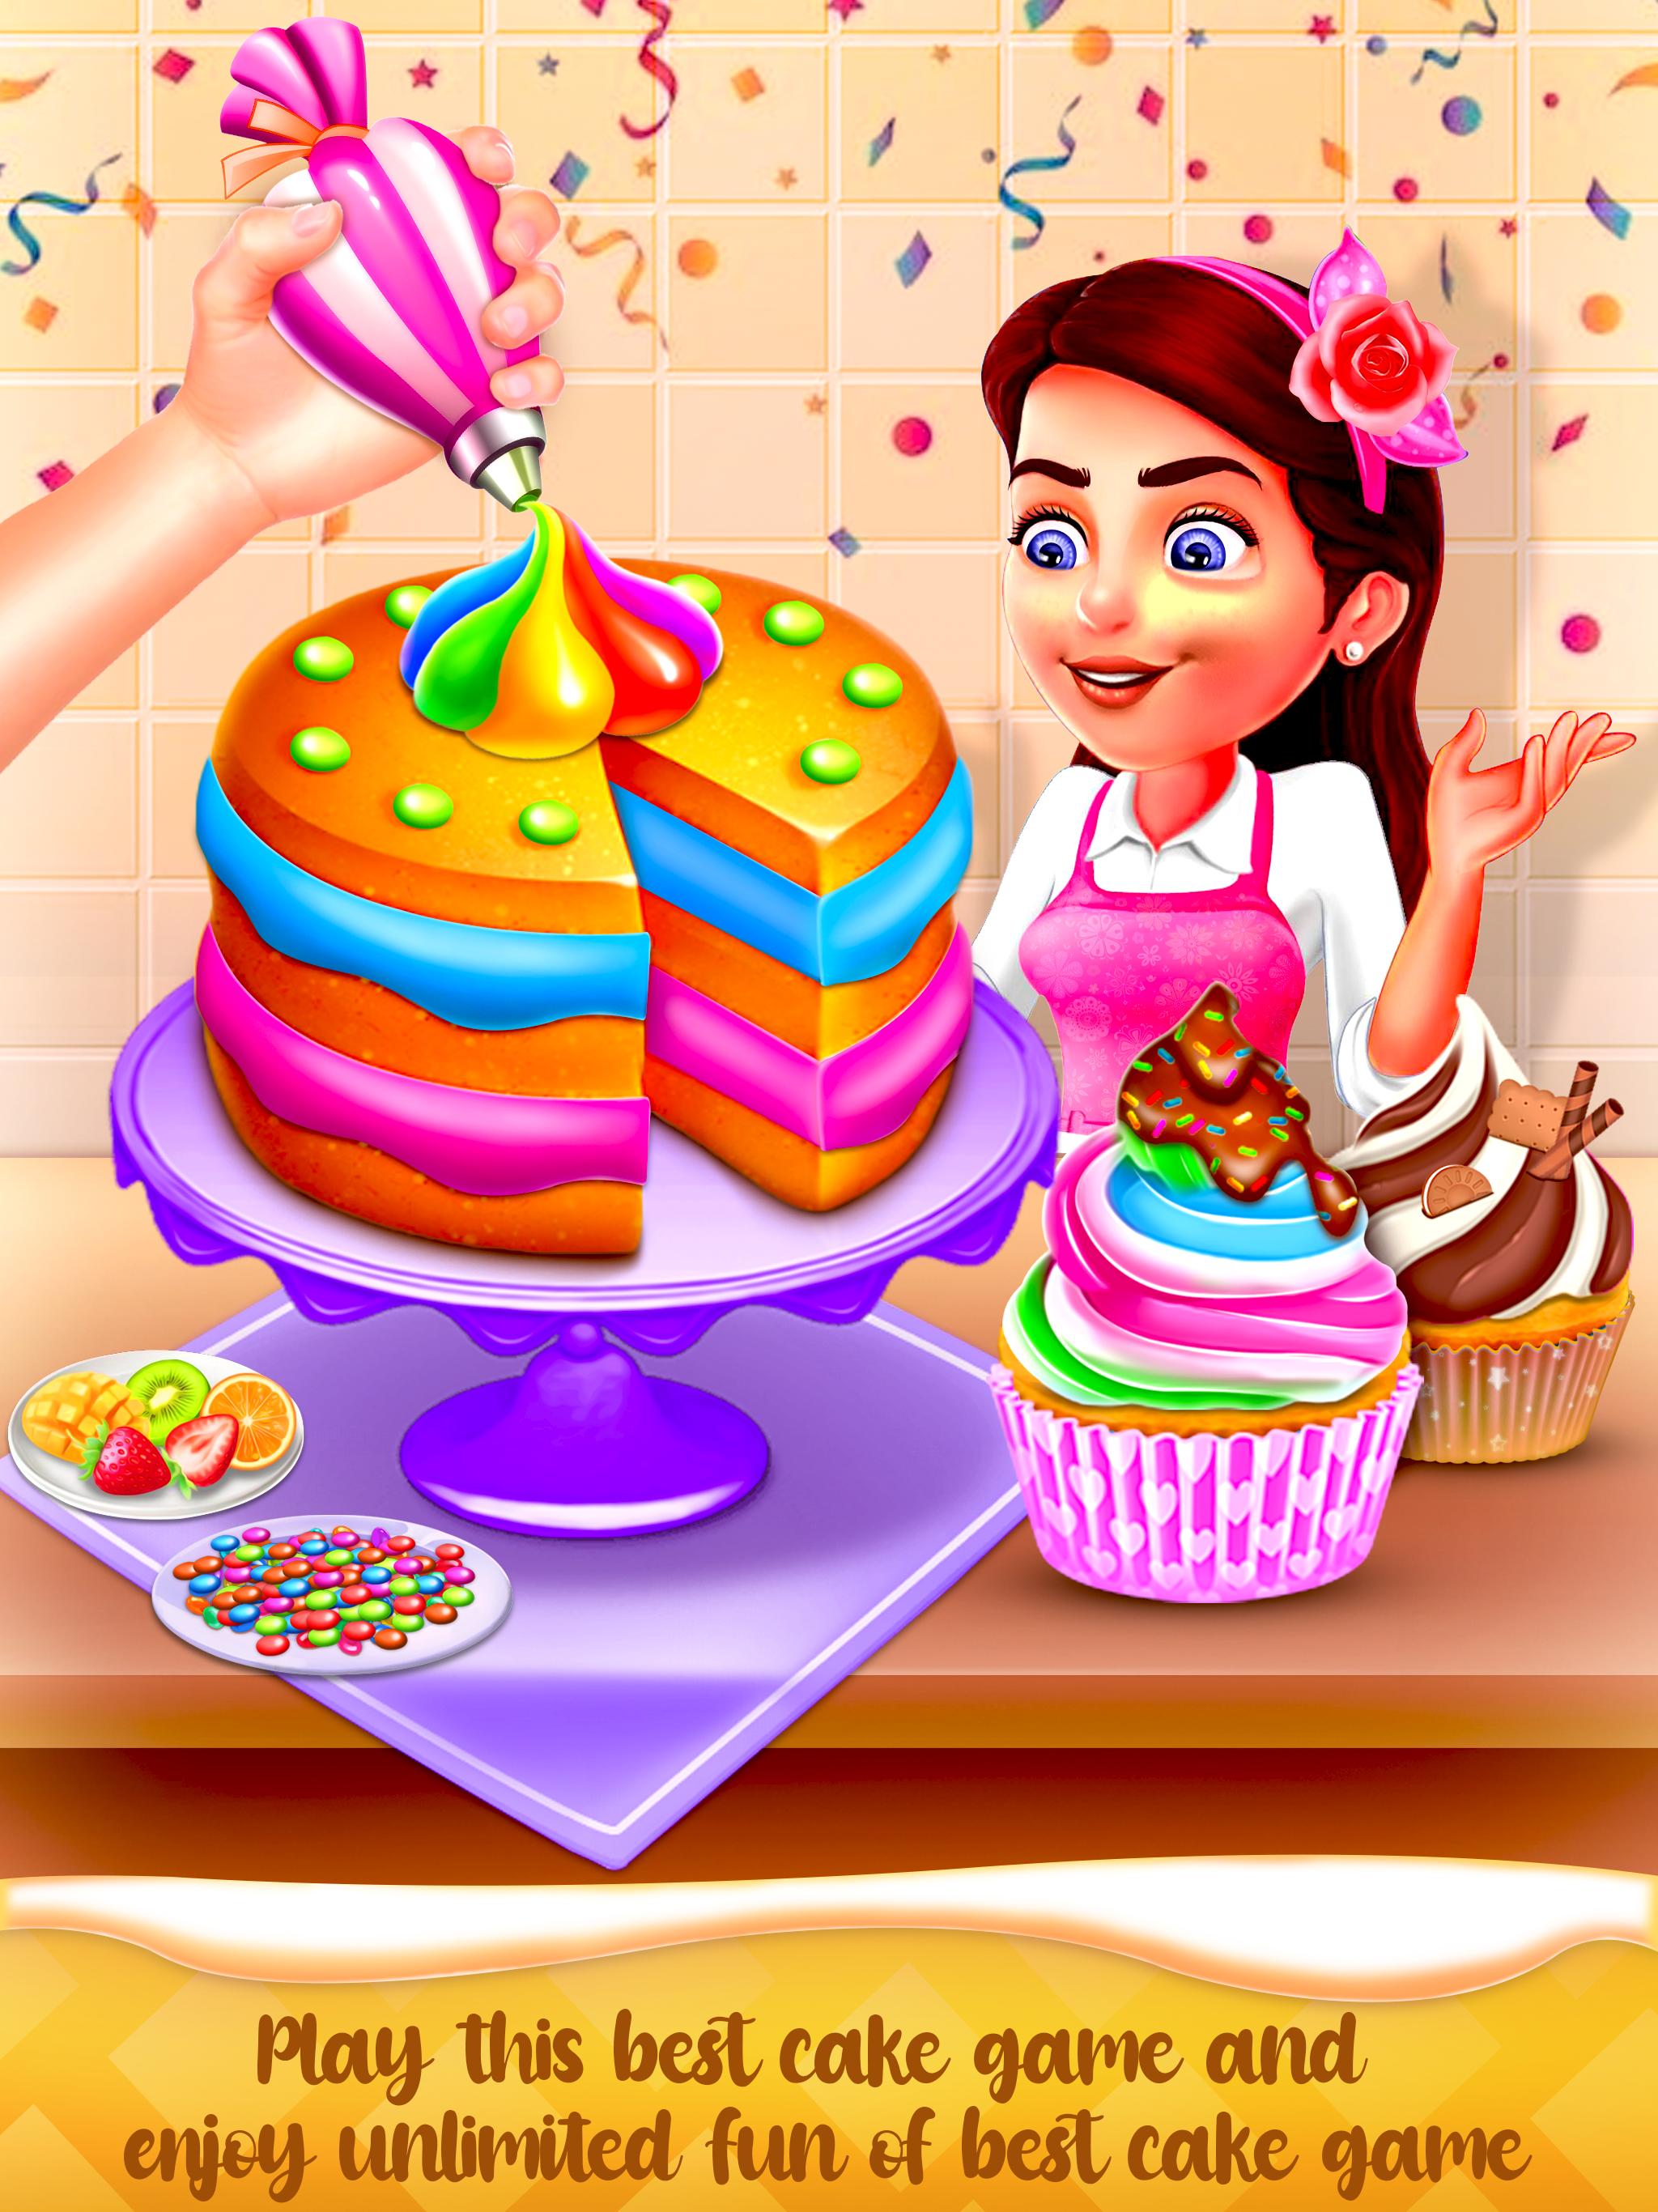 Download Cake Maker - Cooking Cake Game on PC with MEmu